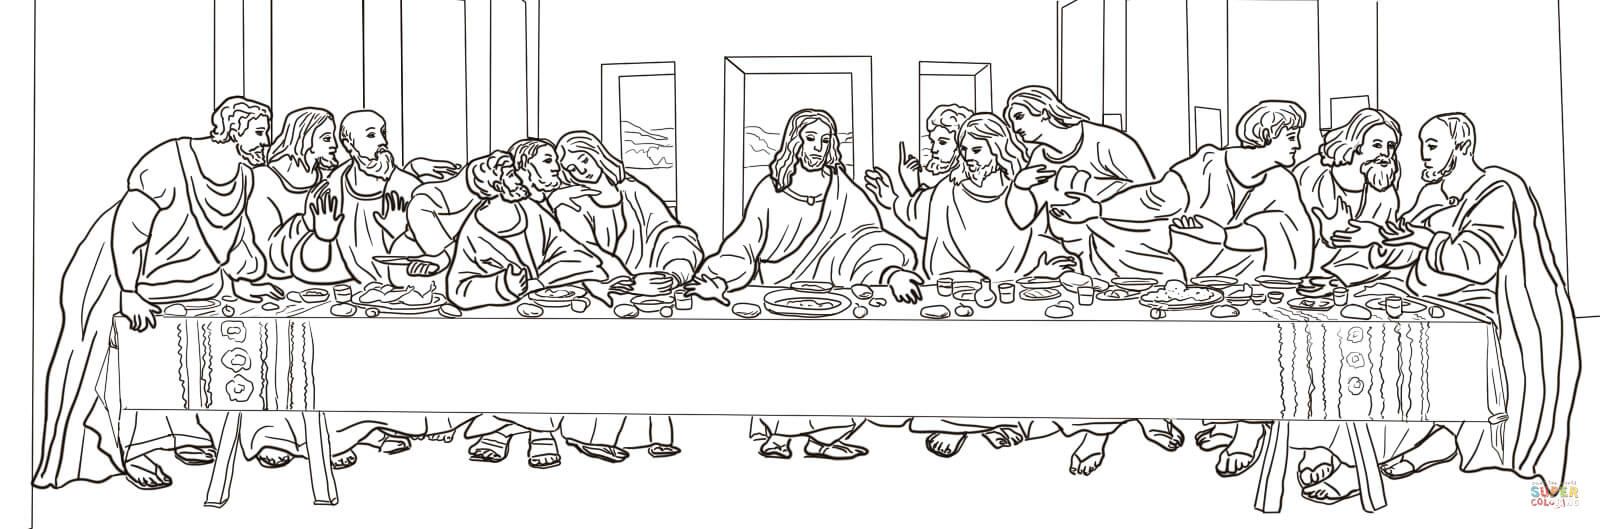 The Last Supper Drawing Stunning Sketch